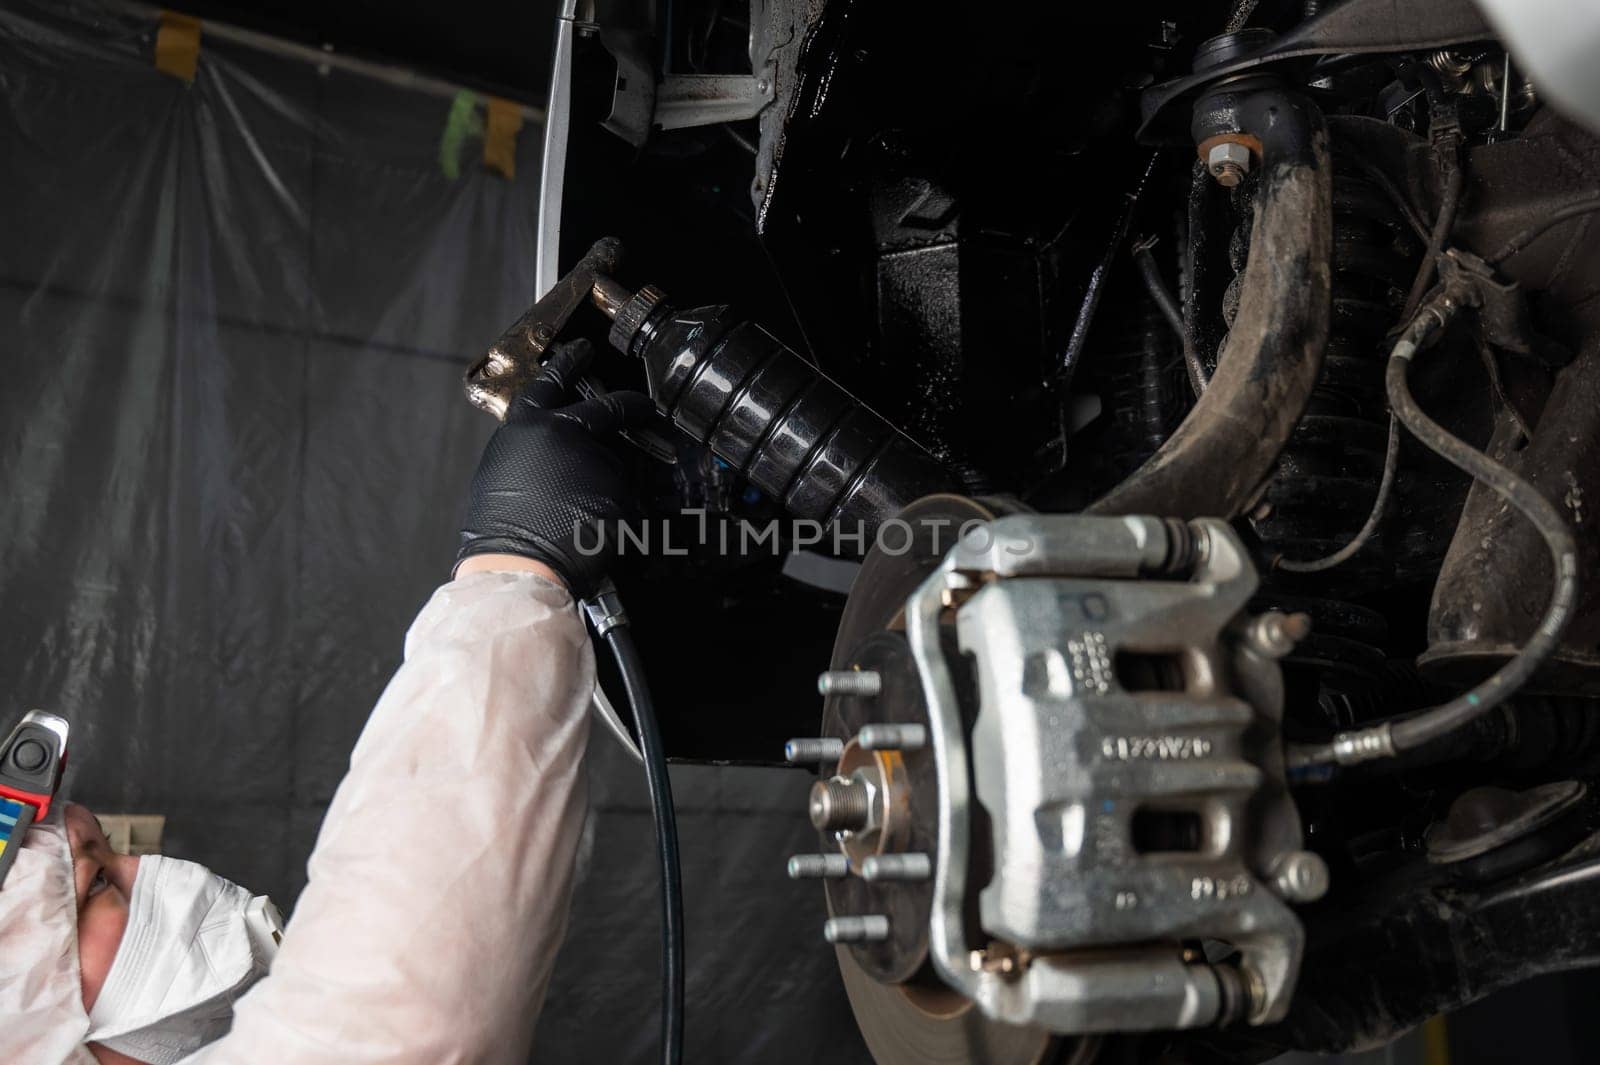 An auto mechanic applies anti-corrosion mastic to the underbody of a car